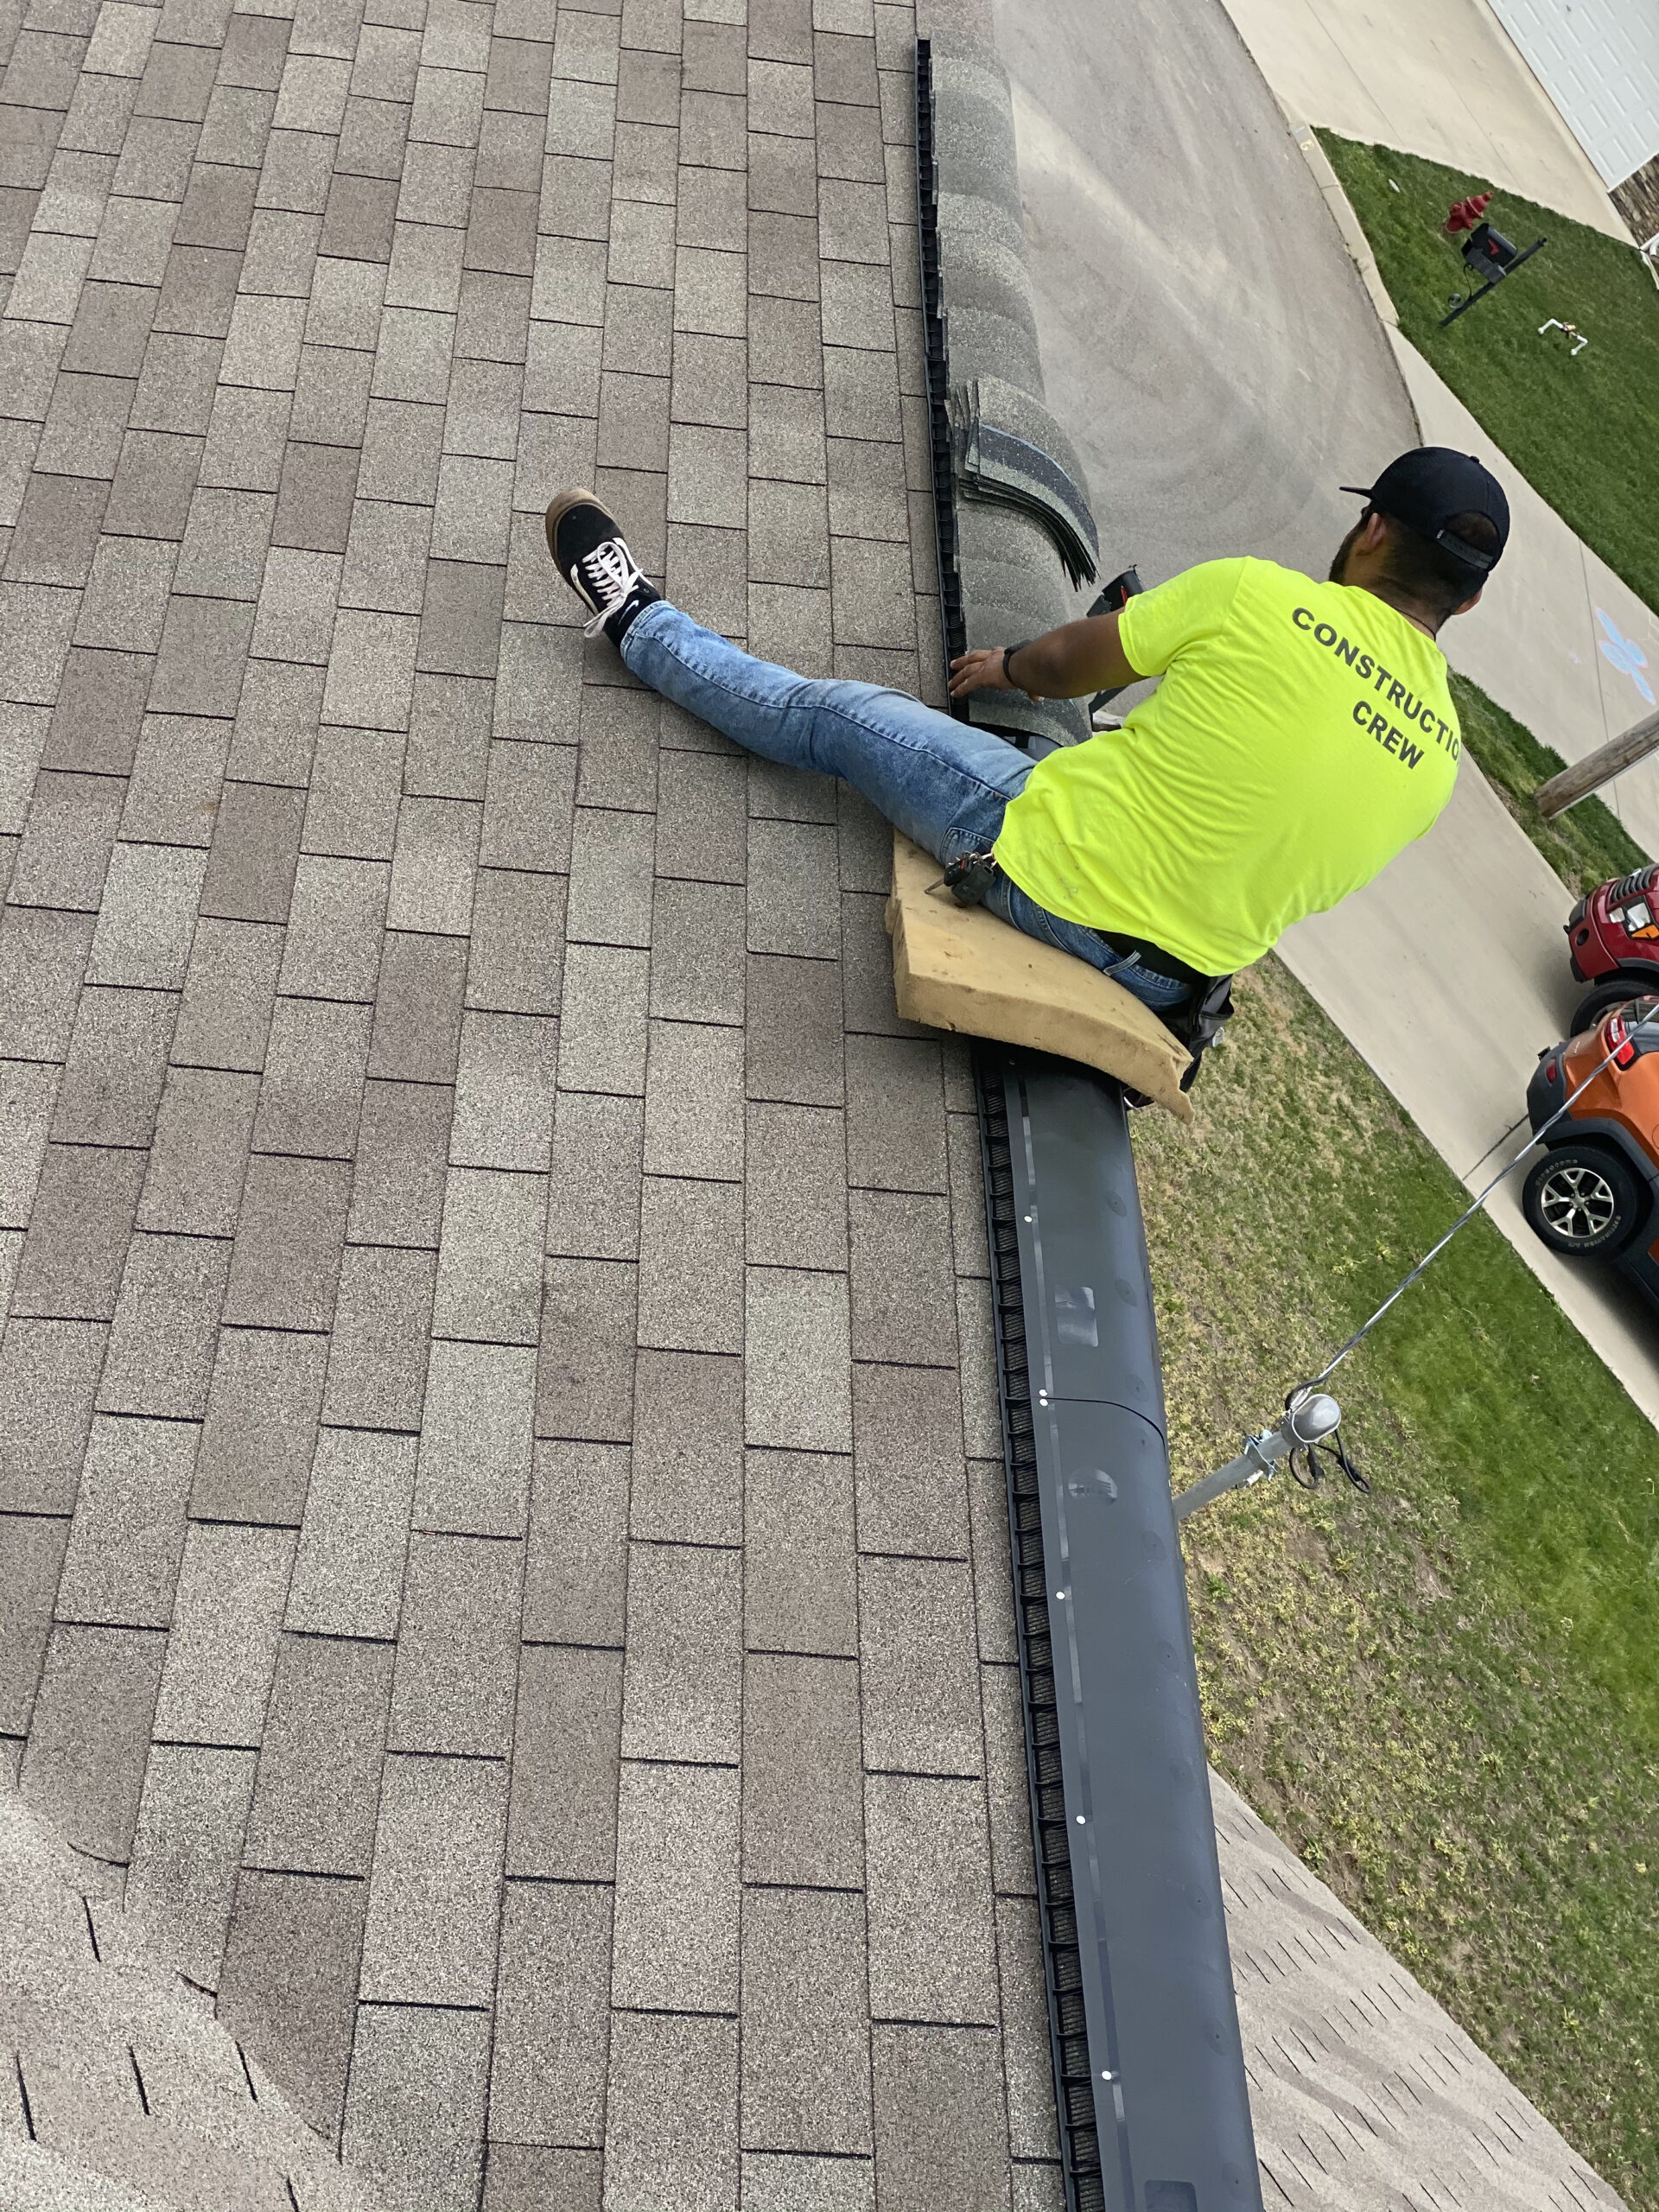 This is a picture of a person installing ridge cap shingles on a black ridge vent